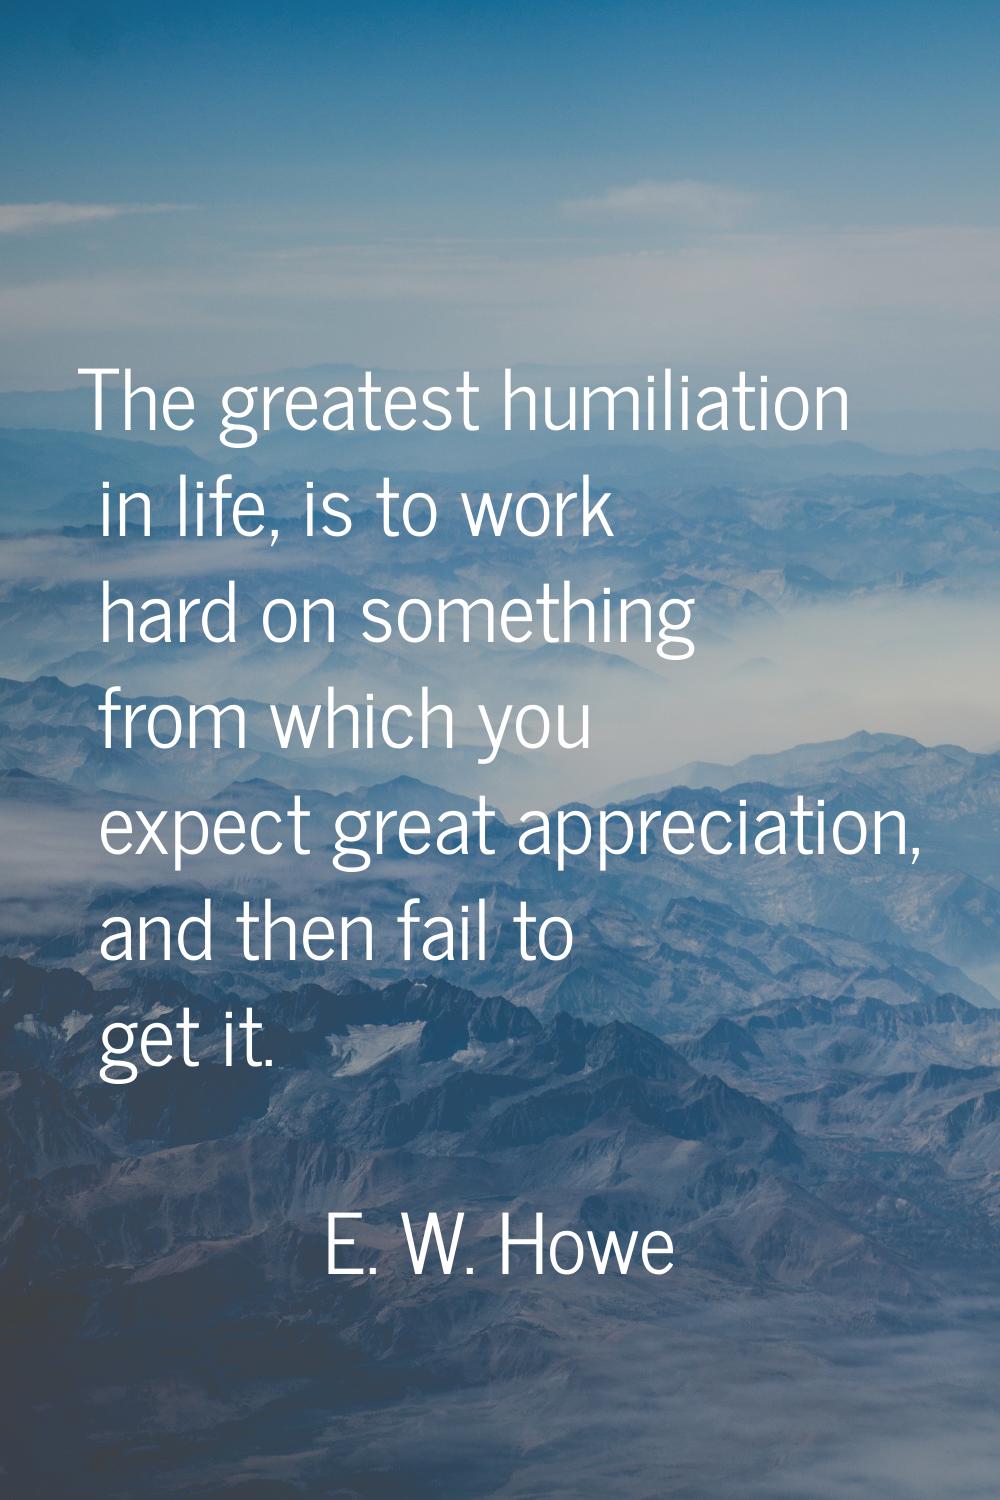 The greatest humiliation in life, is to work hard on something from which you expect great apprecia